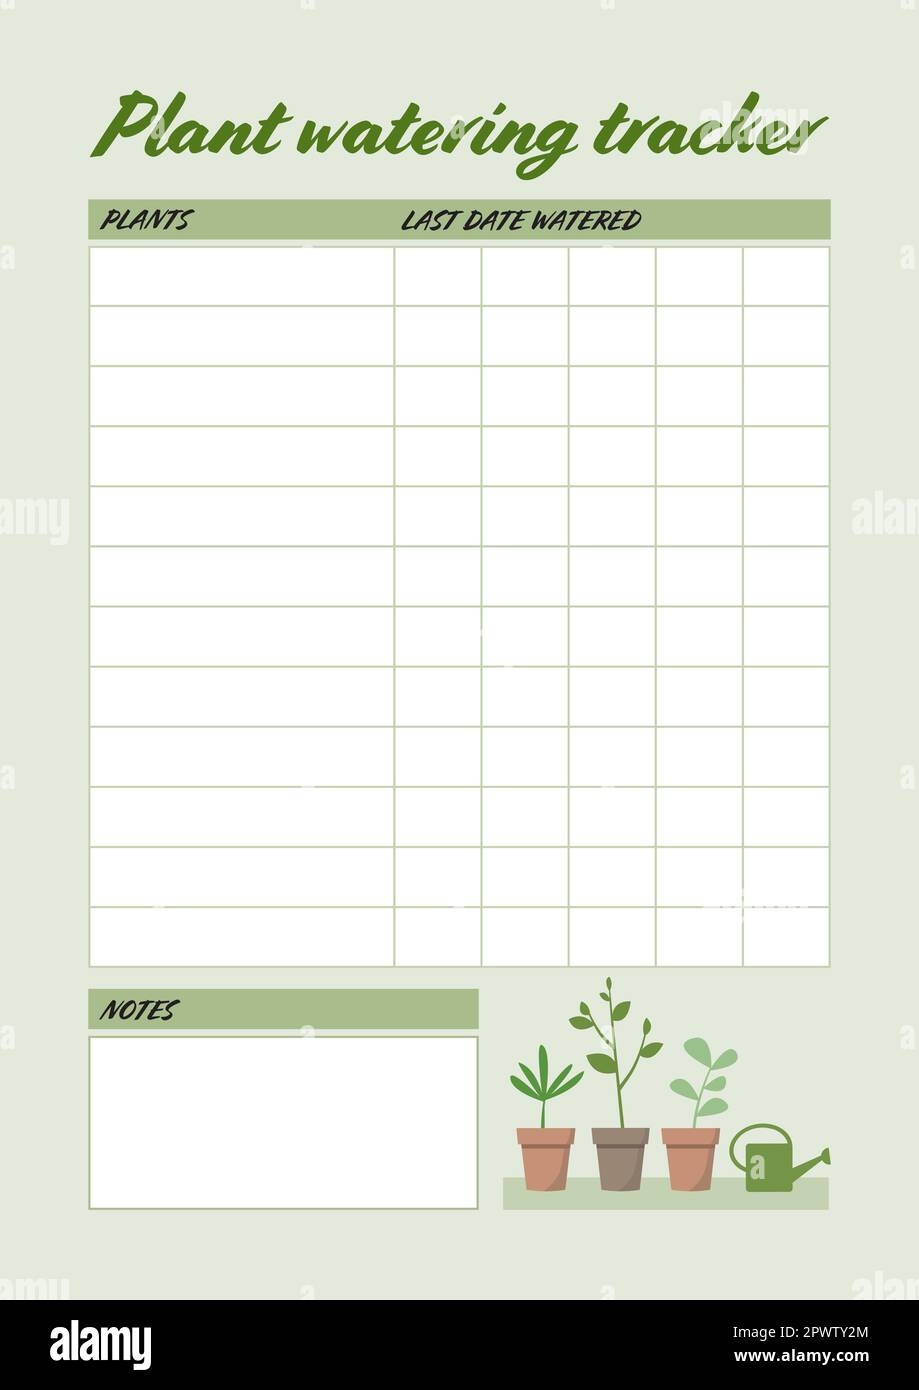 Printable Plant Watering Tracker A5 Sized Template For Houseplant Care Scheduling Stock Vector Image Art Alamy